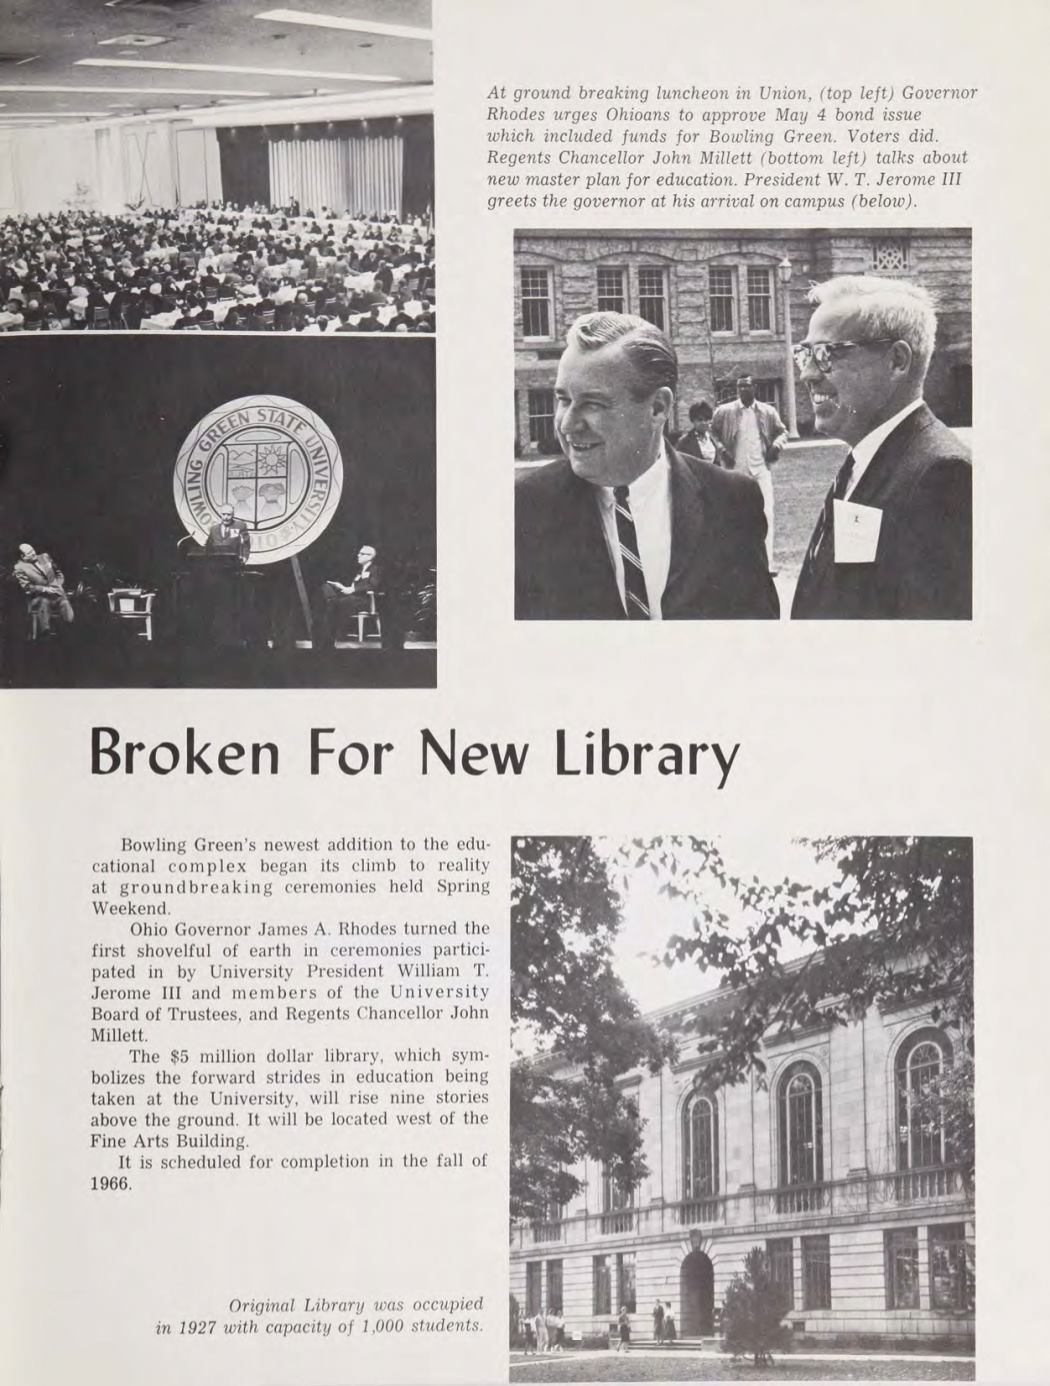 The Key 1965 Bulletin Page 15